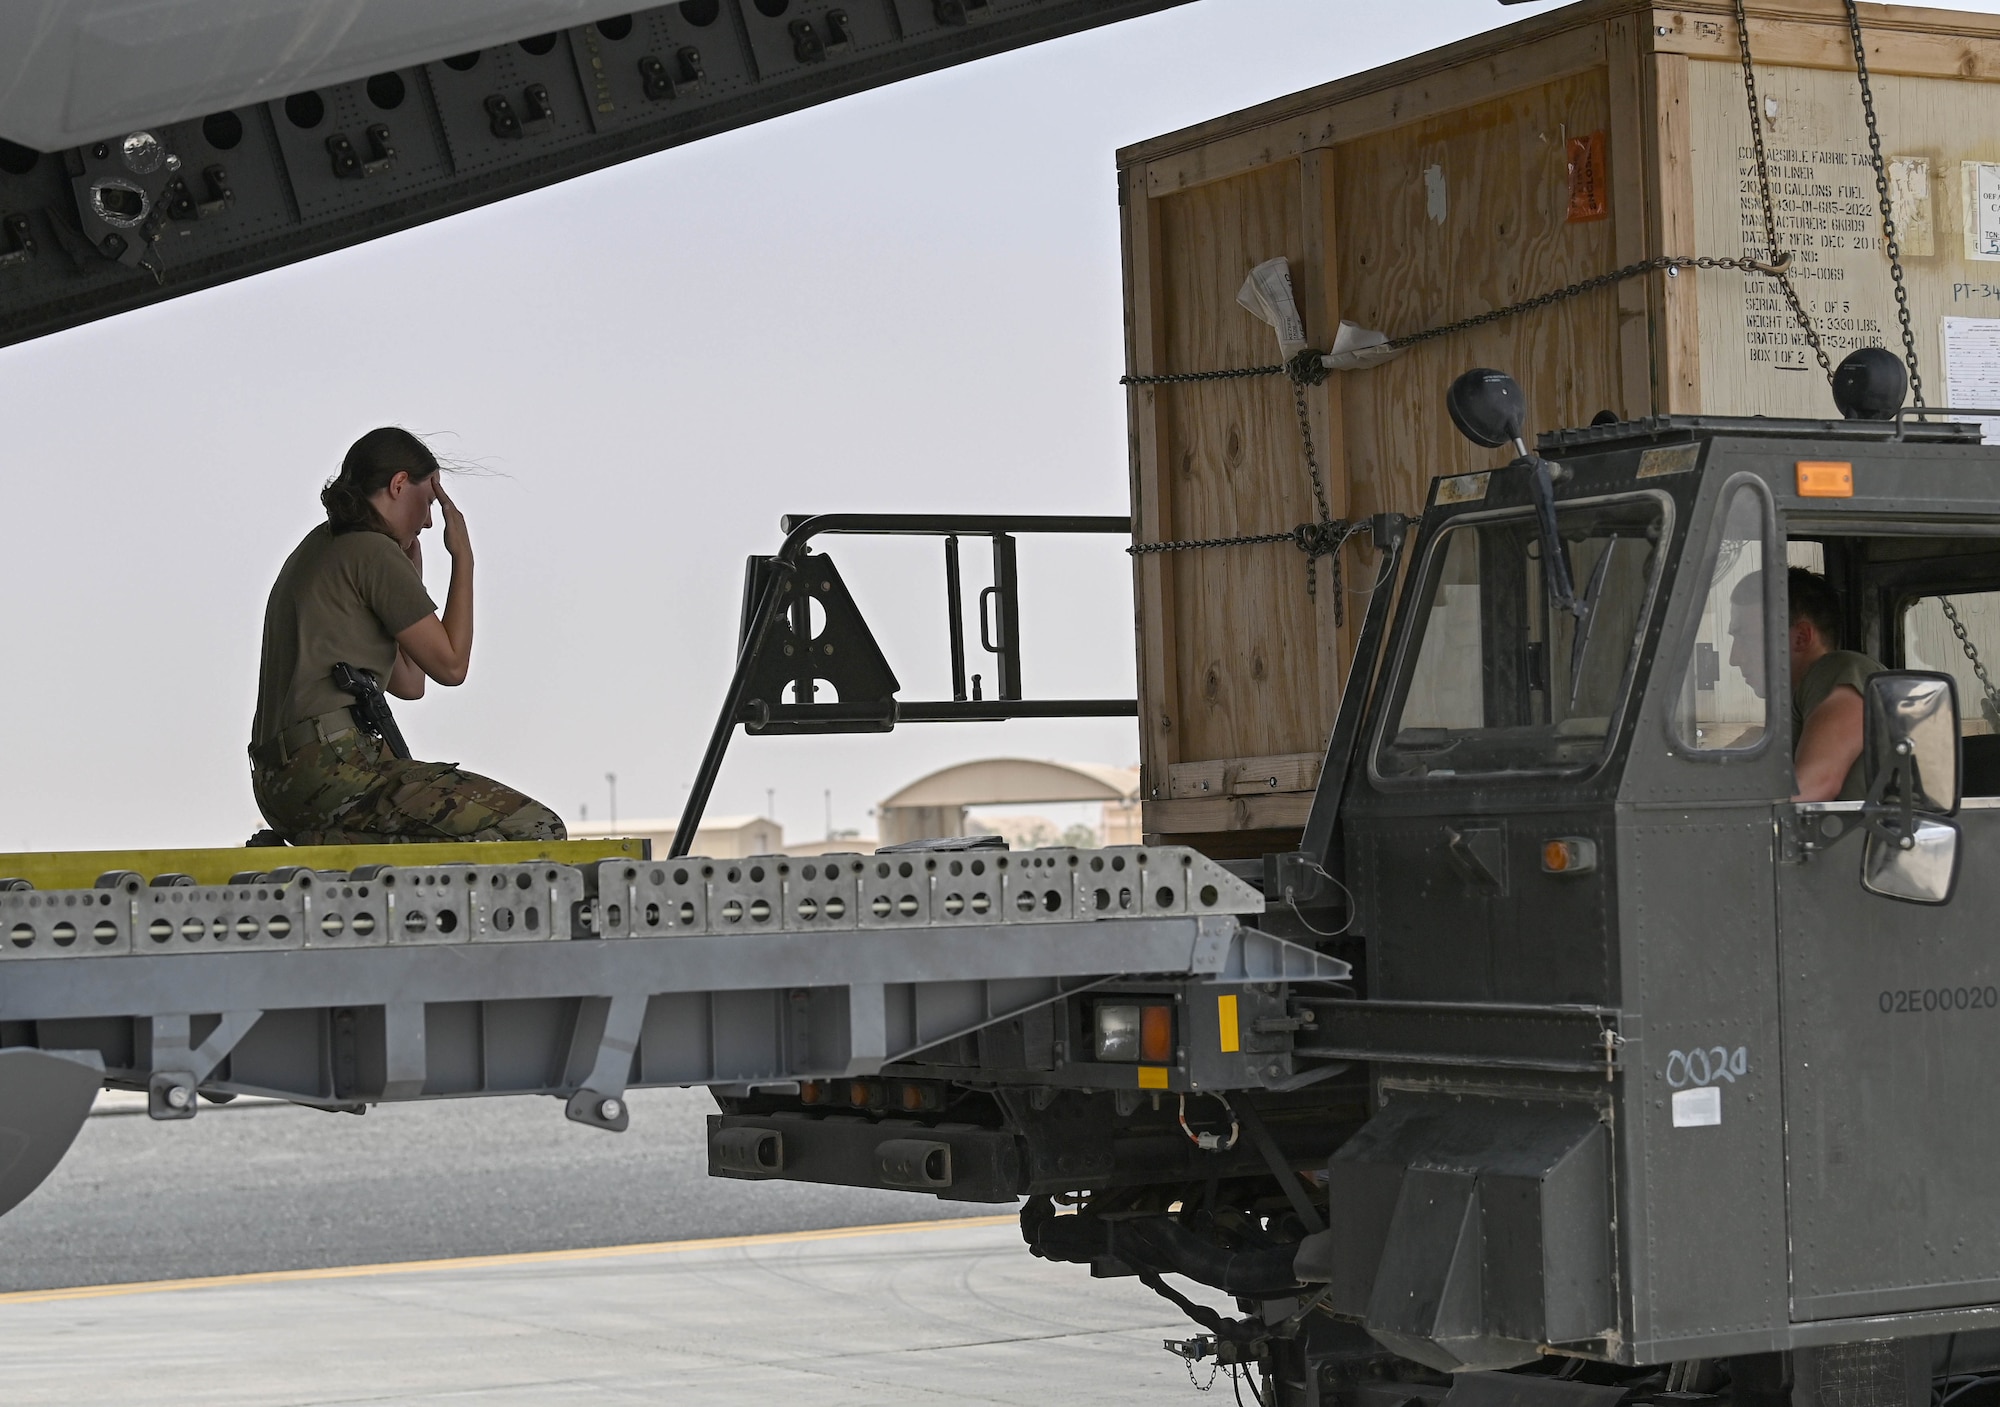 U.S. Air Force Senior Airman Nicole Snowden (left), an 816th Expeditionary Airlift Squadron loadmaster, directs the loading of cargo on a C-17 Globemaster aircraft July 12, 2022 at Ali Al Salem Air Base, Kuwait. The C-17, assigned to Al Udeid Airbase, Qatar, flies missions throughout the region transporting cargo and passengers. (U.S. Air National Guard photo by Tech. Sgt. Michael J. Kelly)